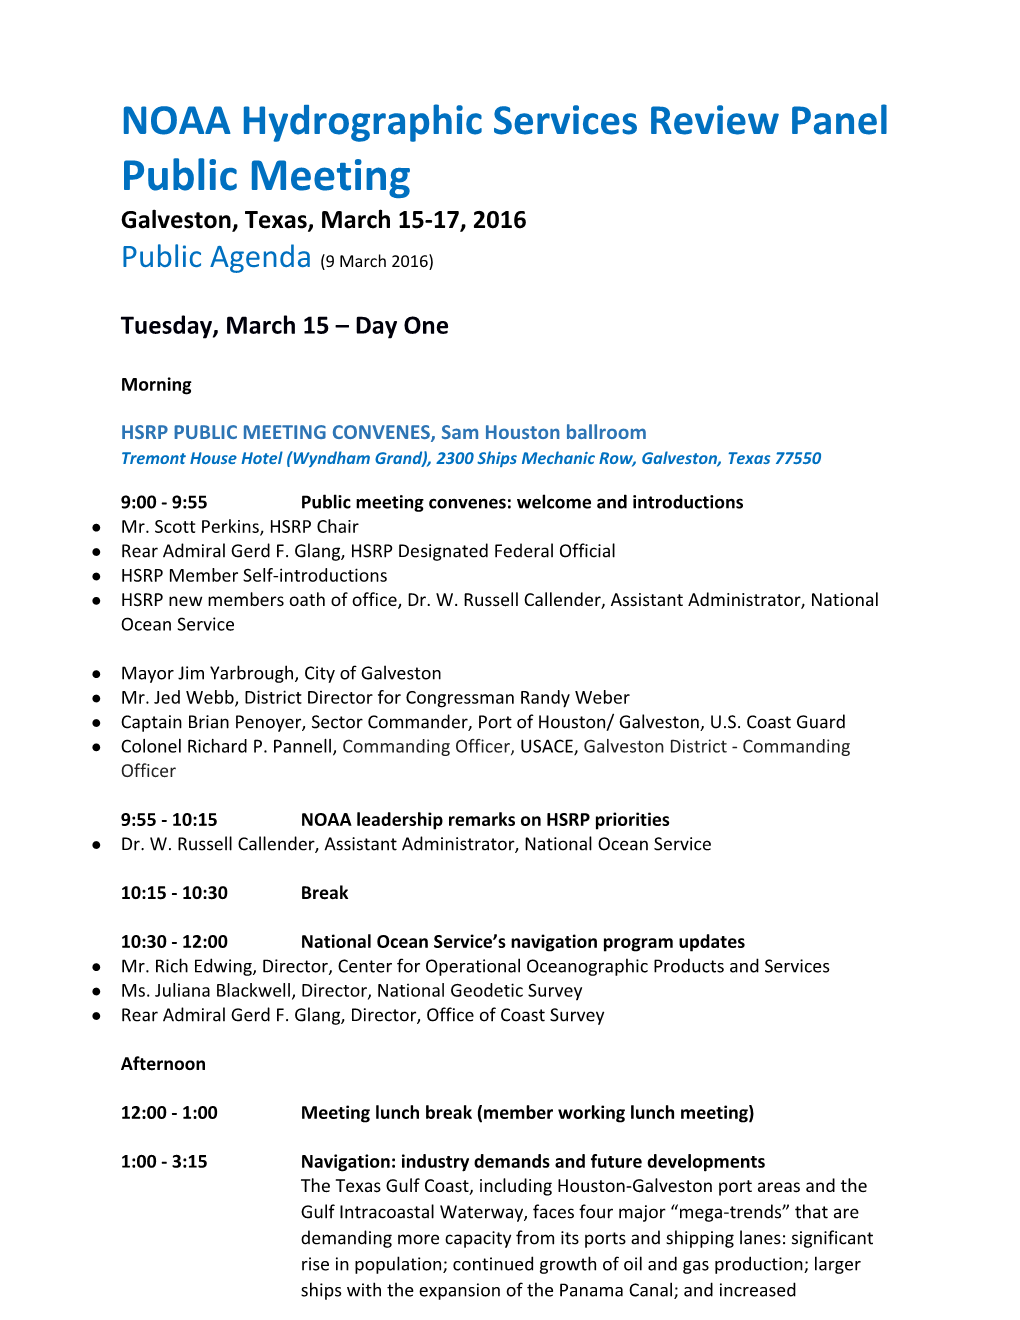 NOAA Hydrographic Services Review Panel Public Meeting